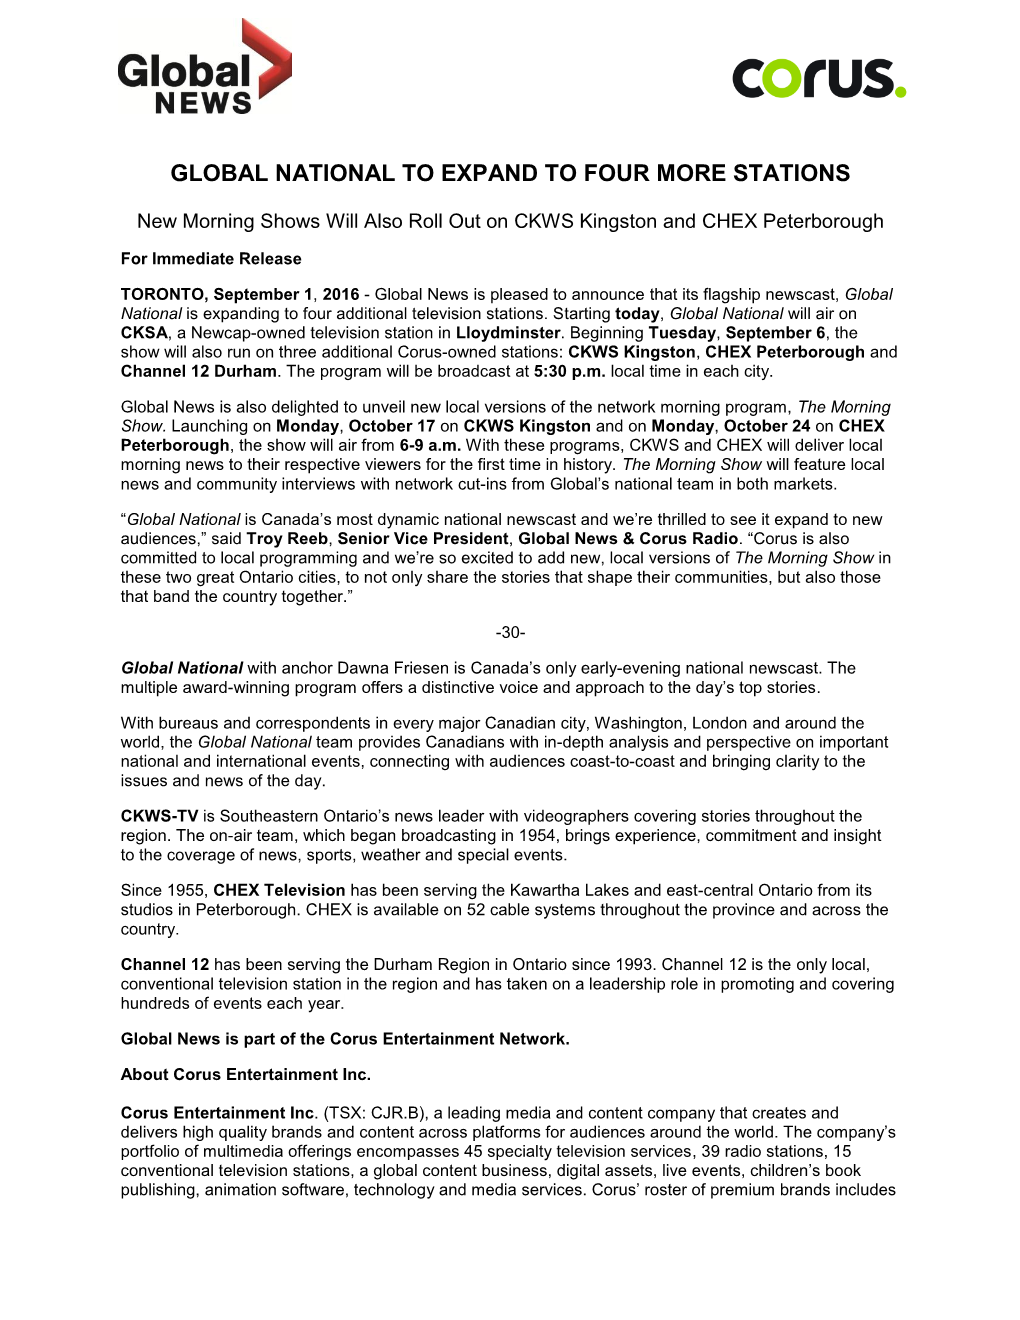 Global National to Expand to Four More Stations